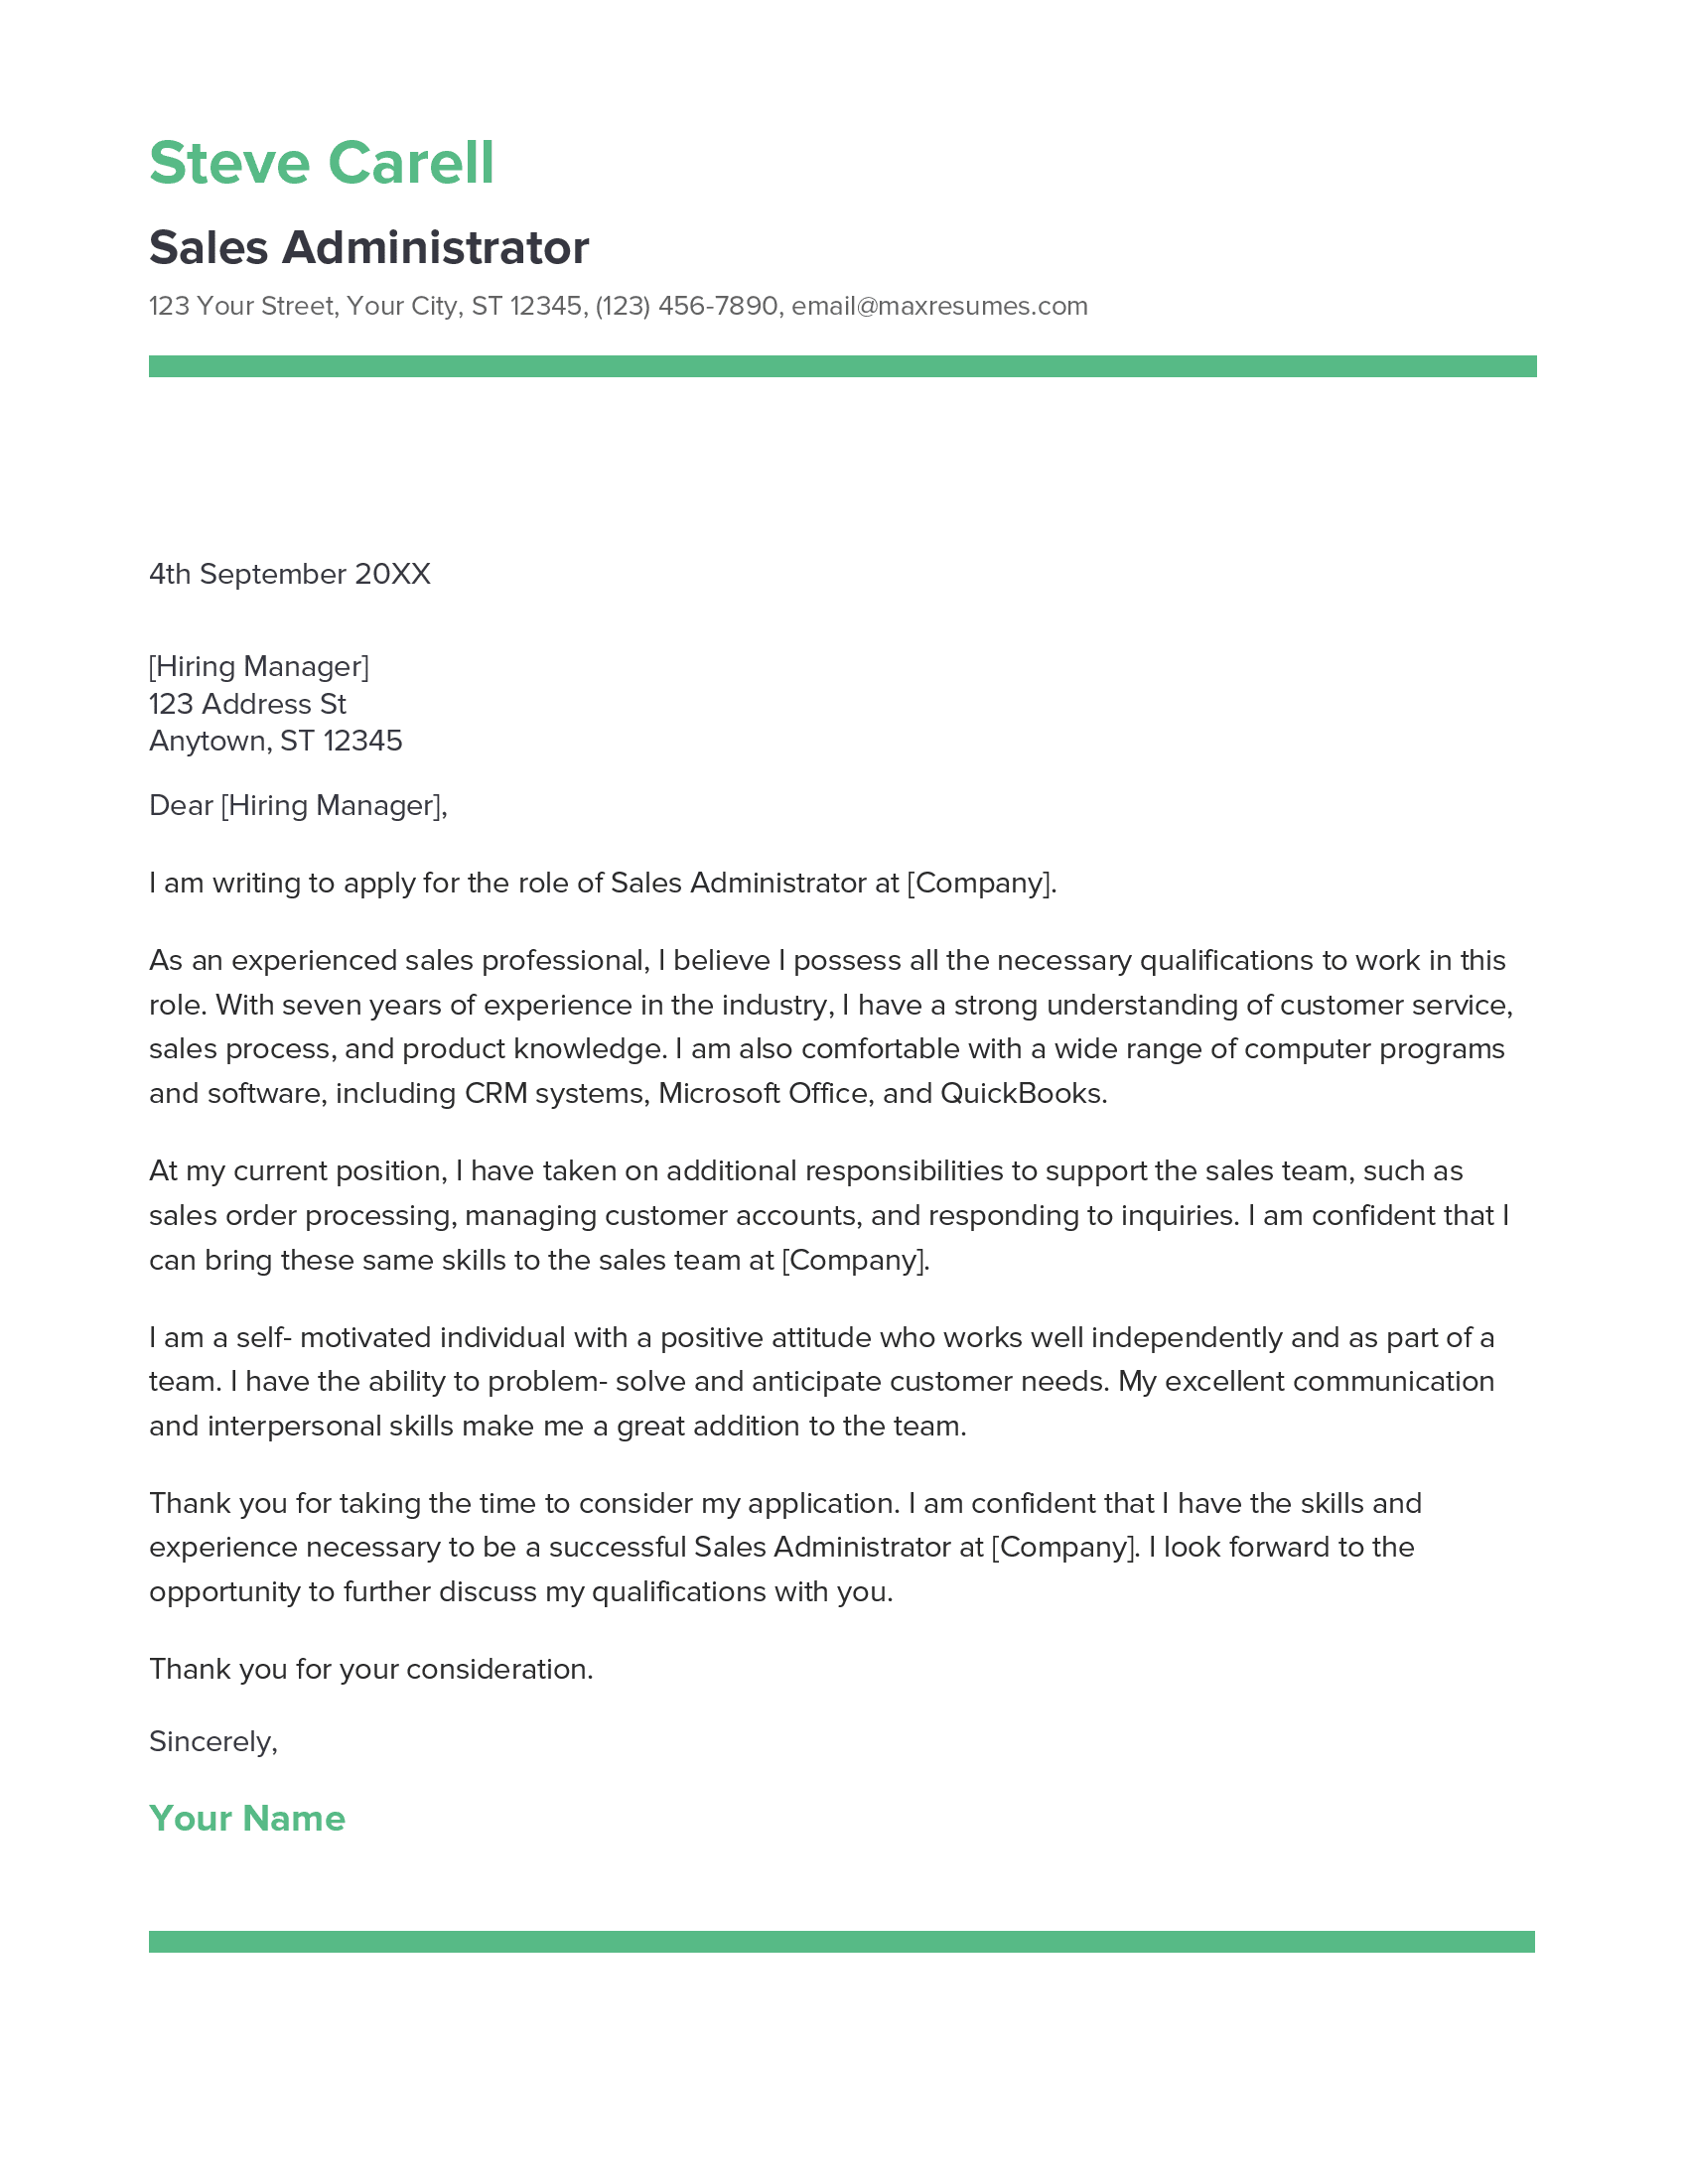 Sales Administrator Cover Letter Example